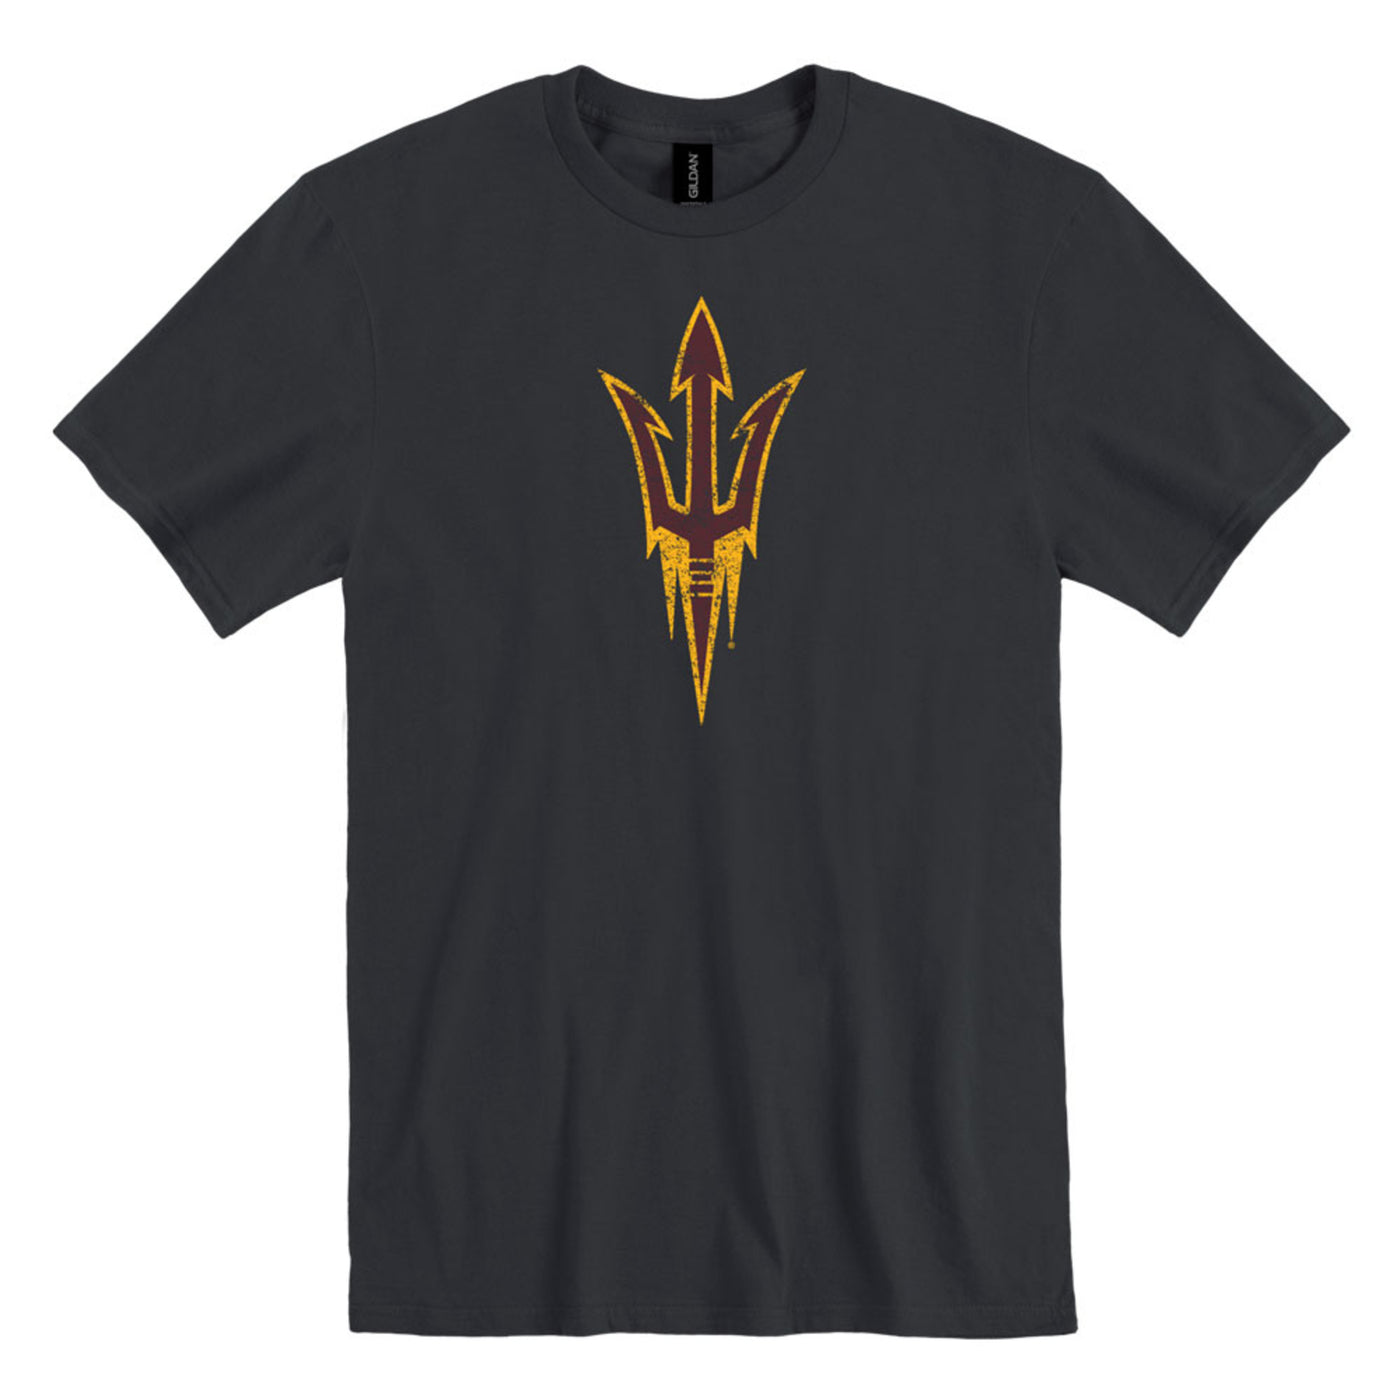 ASU black shirt with pitchfork logo in maroon outlined in gold.